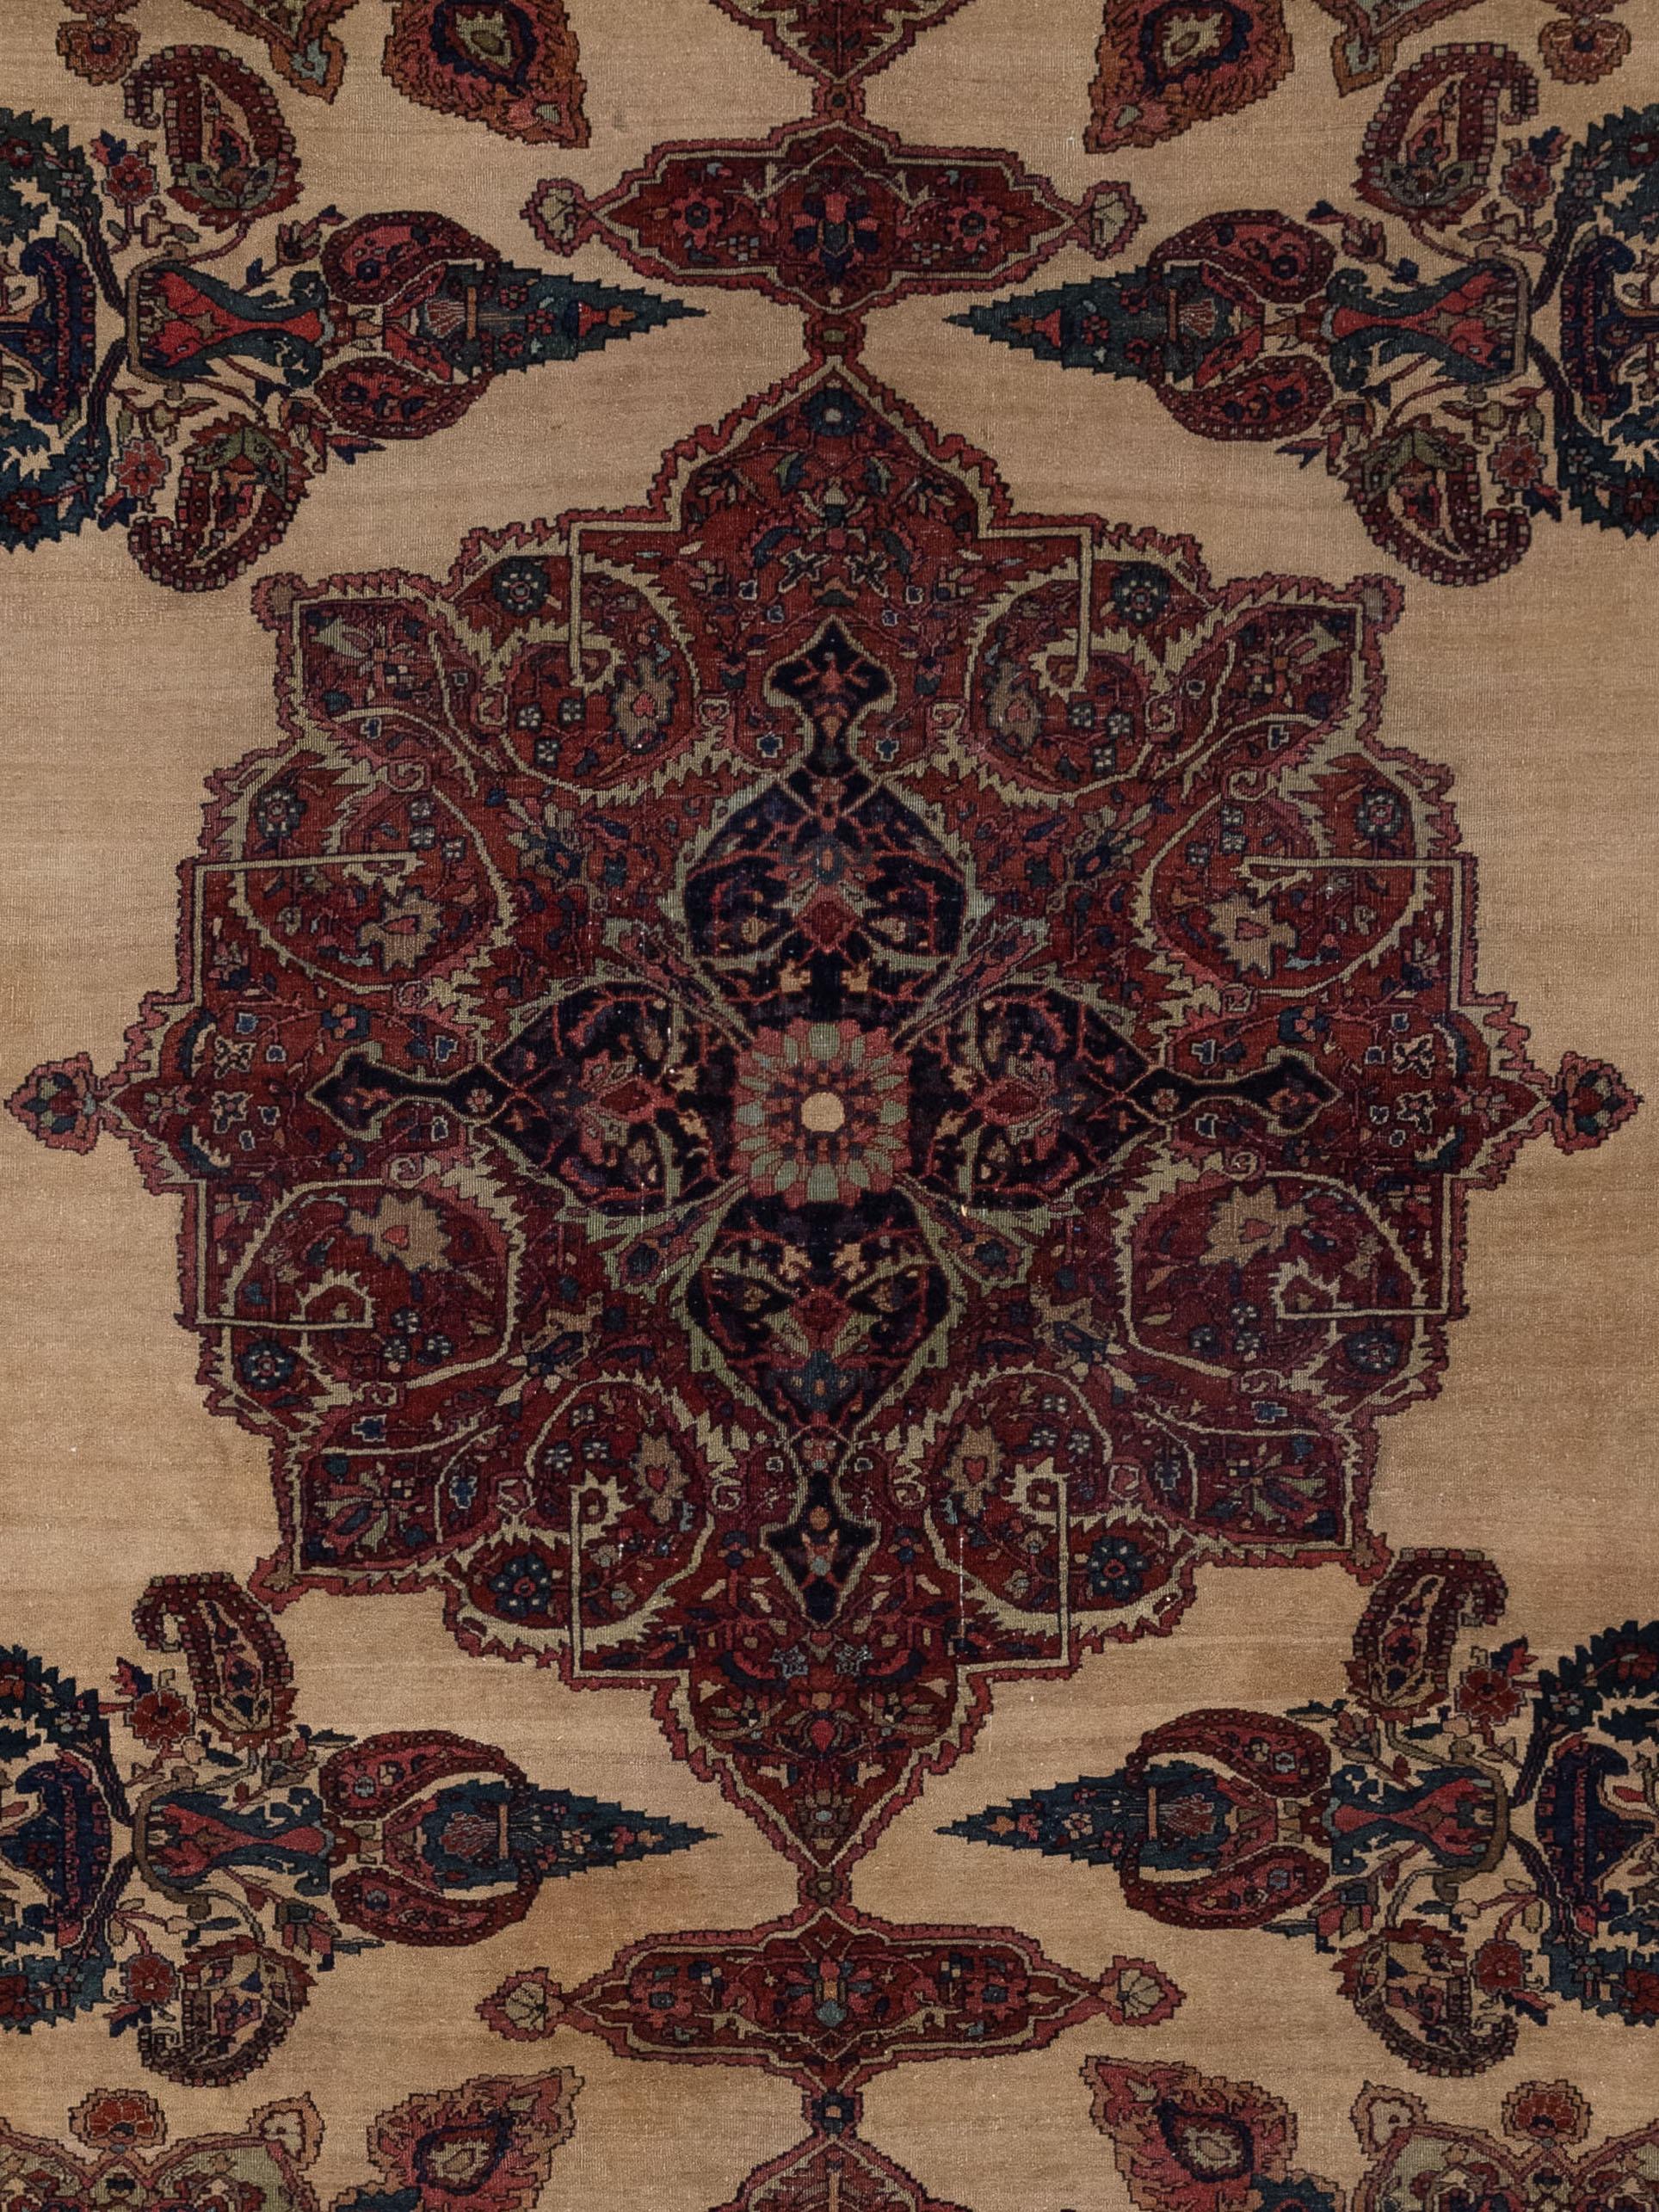 Farahan rugs originate from an area north of Arak, Iran. These rugs get their name Farahan who was a famous carpet weaver from the small village Sarouk. Farahan trademarked the use of a central medallion motif in his rugs whilst using a Herati